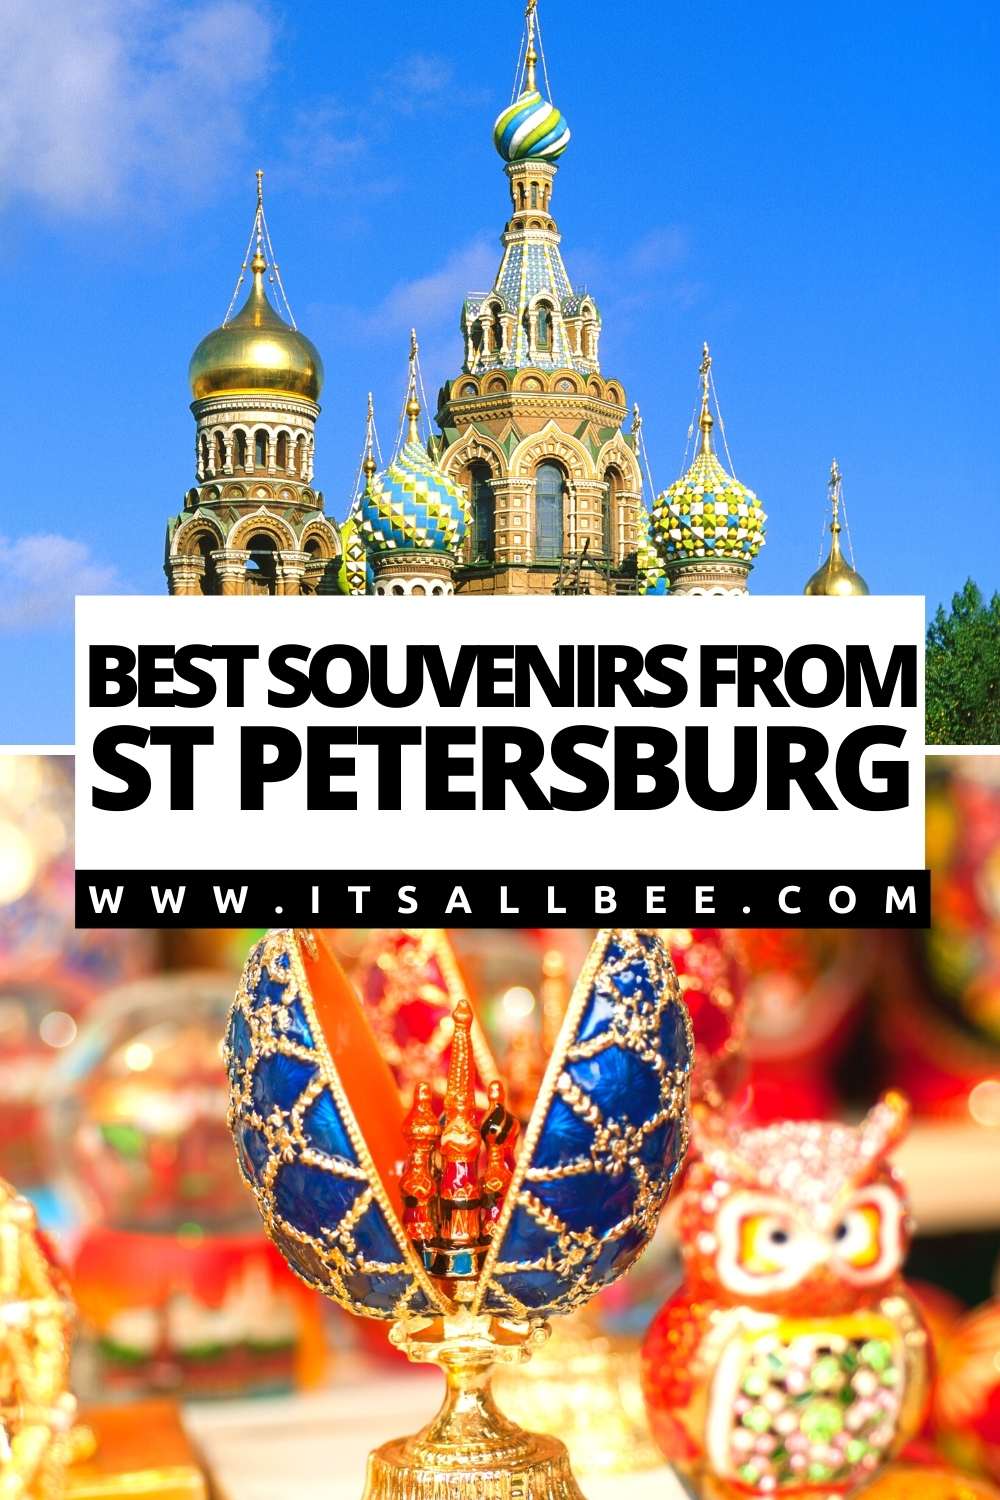 st Petersburg Russia Souvenirs | Souvenirs From St Petersburg | Best Souvenirs St Petersburg | Best Russian Souvenirs | Best Souvenirs From Russia